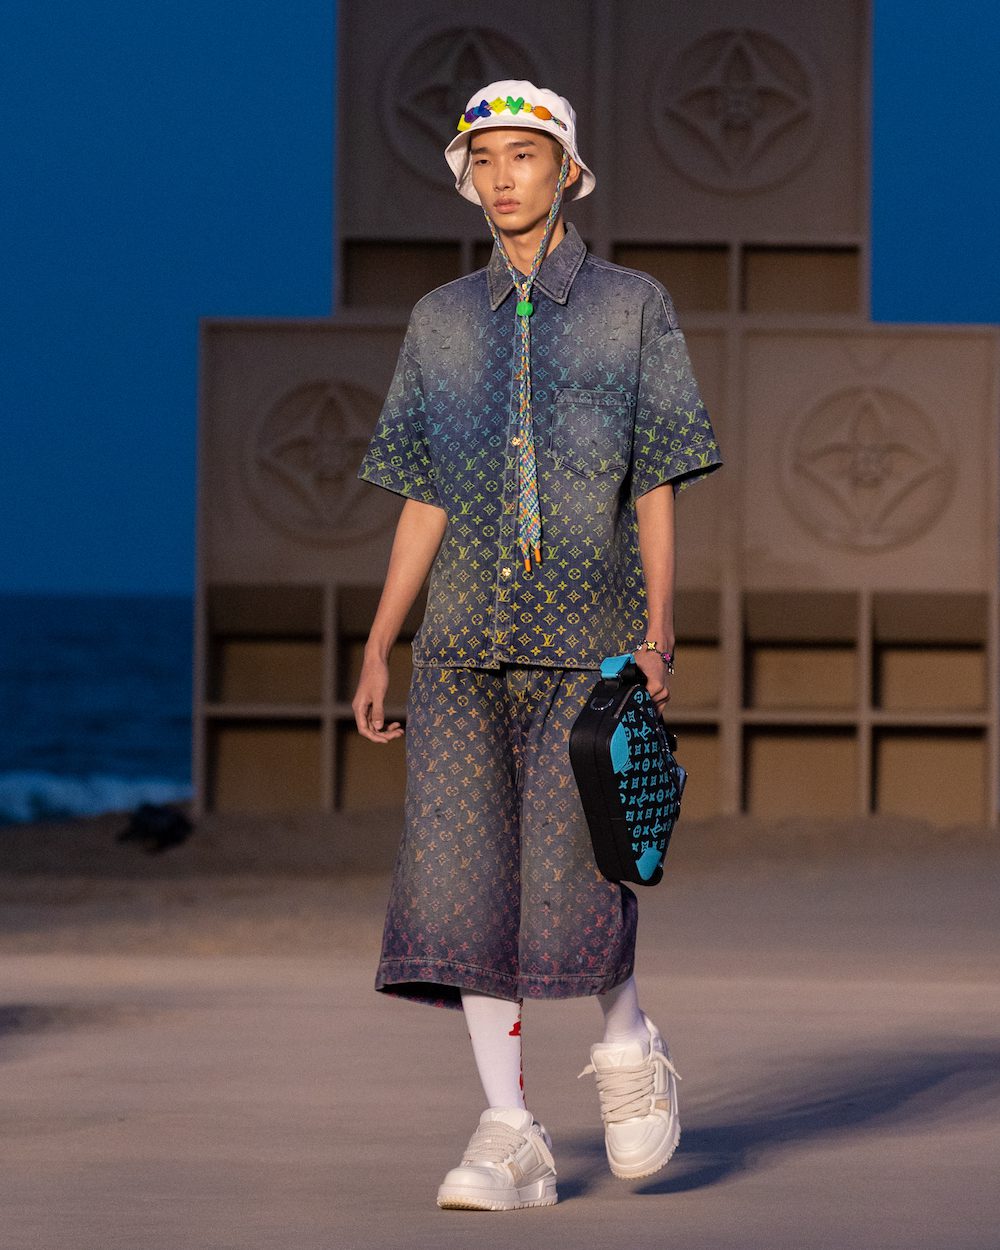 louisvuitton releases a surprise apparel collection for @pharrell's  @somethinginthewater Festival.⁠ ⁠ The collection features five apparel…